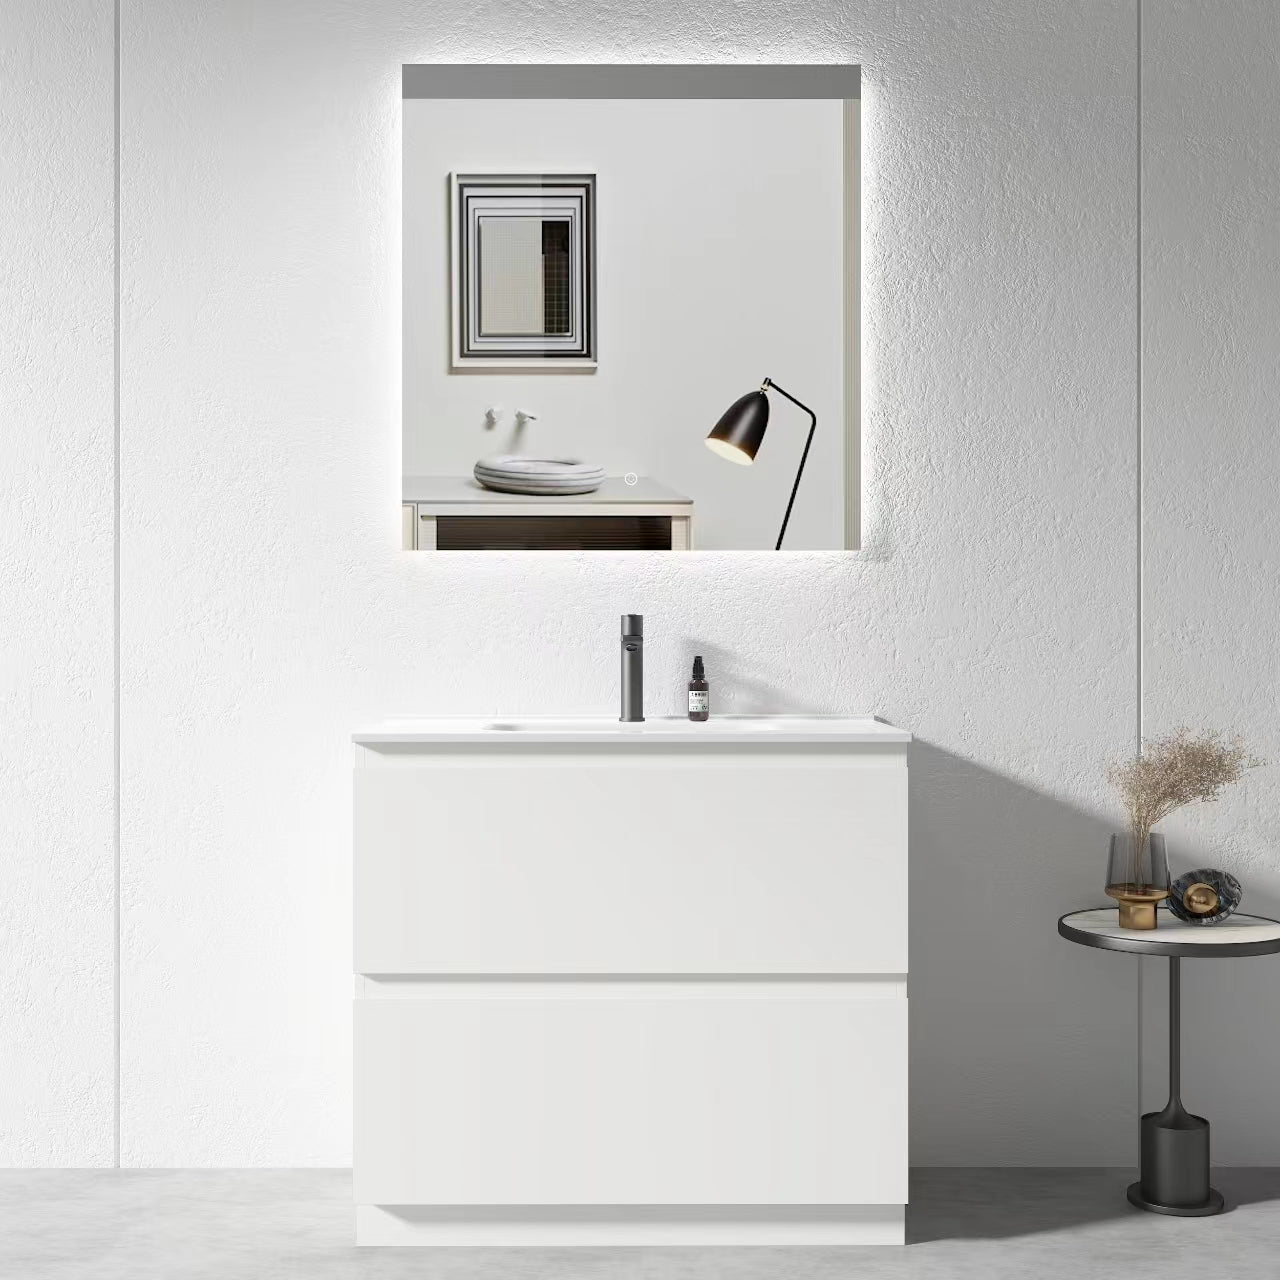 900mm Plywood Gloss White Floor Standing Vanity Unit With Ceramic Basin